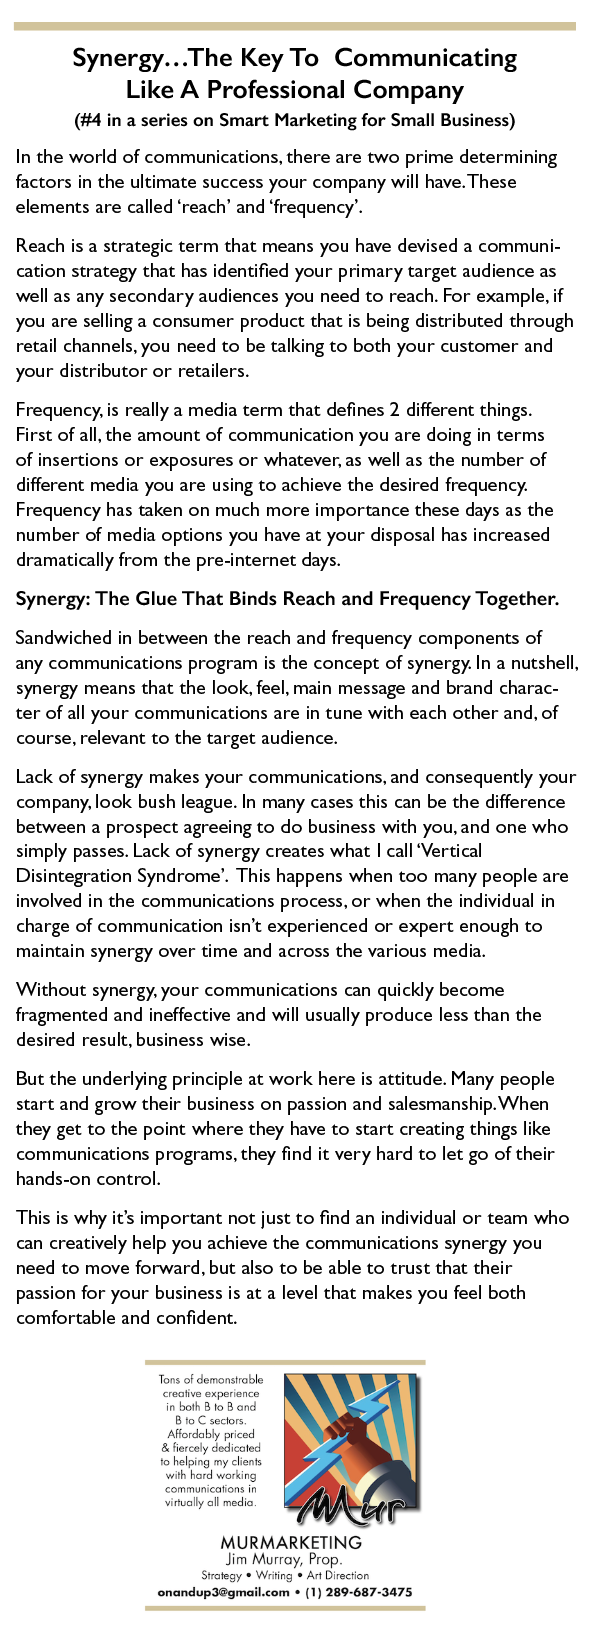 Synergy...The Key To Communicating

Like A Professional Company
(#4 in a series on Smart Marketing for Small Business)

In the world of communications, there are two prime determining
factors in the ulumate success your company will have. These
elements are called ‘reach’ and ‘frequency’.

Reach 1s a strategic term that means you have devised a communi
cation strategy that has identfied your primary target audience as
well as any secondary audiences you need to reach. For example. if
you are selling a consumer product that 1s being distributed through
retail channels. you need to be talking to both your customer and
your distributor or retailers.

Frequency. really a media term that defines 2 different things.
First of all, the amount of communication you are doing in terms
of insertions or exposures or whatever. as well as the number of
different medi you are using to achieve the desired frequency.
Frequency has taken on much more importance these days as the
number of medi options you have at your disposal has increased
dramatically from the pre-nternet days.

Synergy: The Glue That Binds Reach and Frequency Together.

Sandwiched in between the reach and frequency components of

any communications program 1s the concept of synergy. In a nutshell,
synergy means that the look. feel. main message and brand charac-
ter of all your communications are in tune with each other and. of
course. relevant to the target audience.

Lack of synergy makes your communications, and consequently your
company. look bush league. In many cases this can be the difference
between a prospect agreeing to do business with you. and one who
simply passes. Lack of synergy creates what | call ‘Vertical
Disintegration Syndrome’. This happens when too many people are
involved in the communications process. or when the individual in
charge of communication 1sn't experienced or expert enough to
maintain synergy over ime and across the various medua.

Without synergy. your communications can quickly become
fragmented and ineffective and will usually produce less than the
desired result. business wise.

But the underlying principle at work here is atutude. Many people
start and grow their business on passion and salesmanship. When
they get to the point where they have to start creating things like
communications programs, they find it very hard to let go of their
hands-on control.

This 1s why it's important not just to find an individual or team who
can creatively help you achieve the communications synergy you
need to move forward. but also to be able to trust that their
passion for your business 1s at a level that makes you feel both
comfortable and confident.

 

MURMARKETING
im Murray, Pr

 

onandupddgmailiom + (1) 289-687-3475